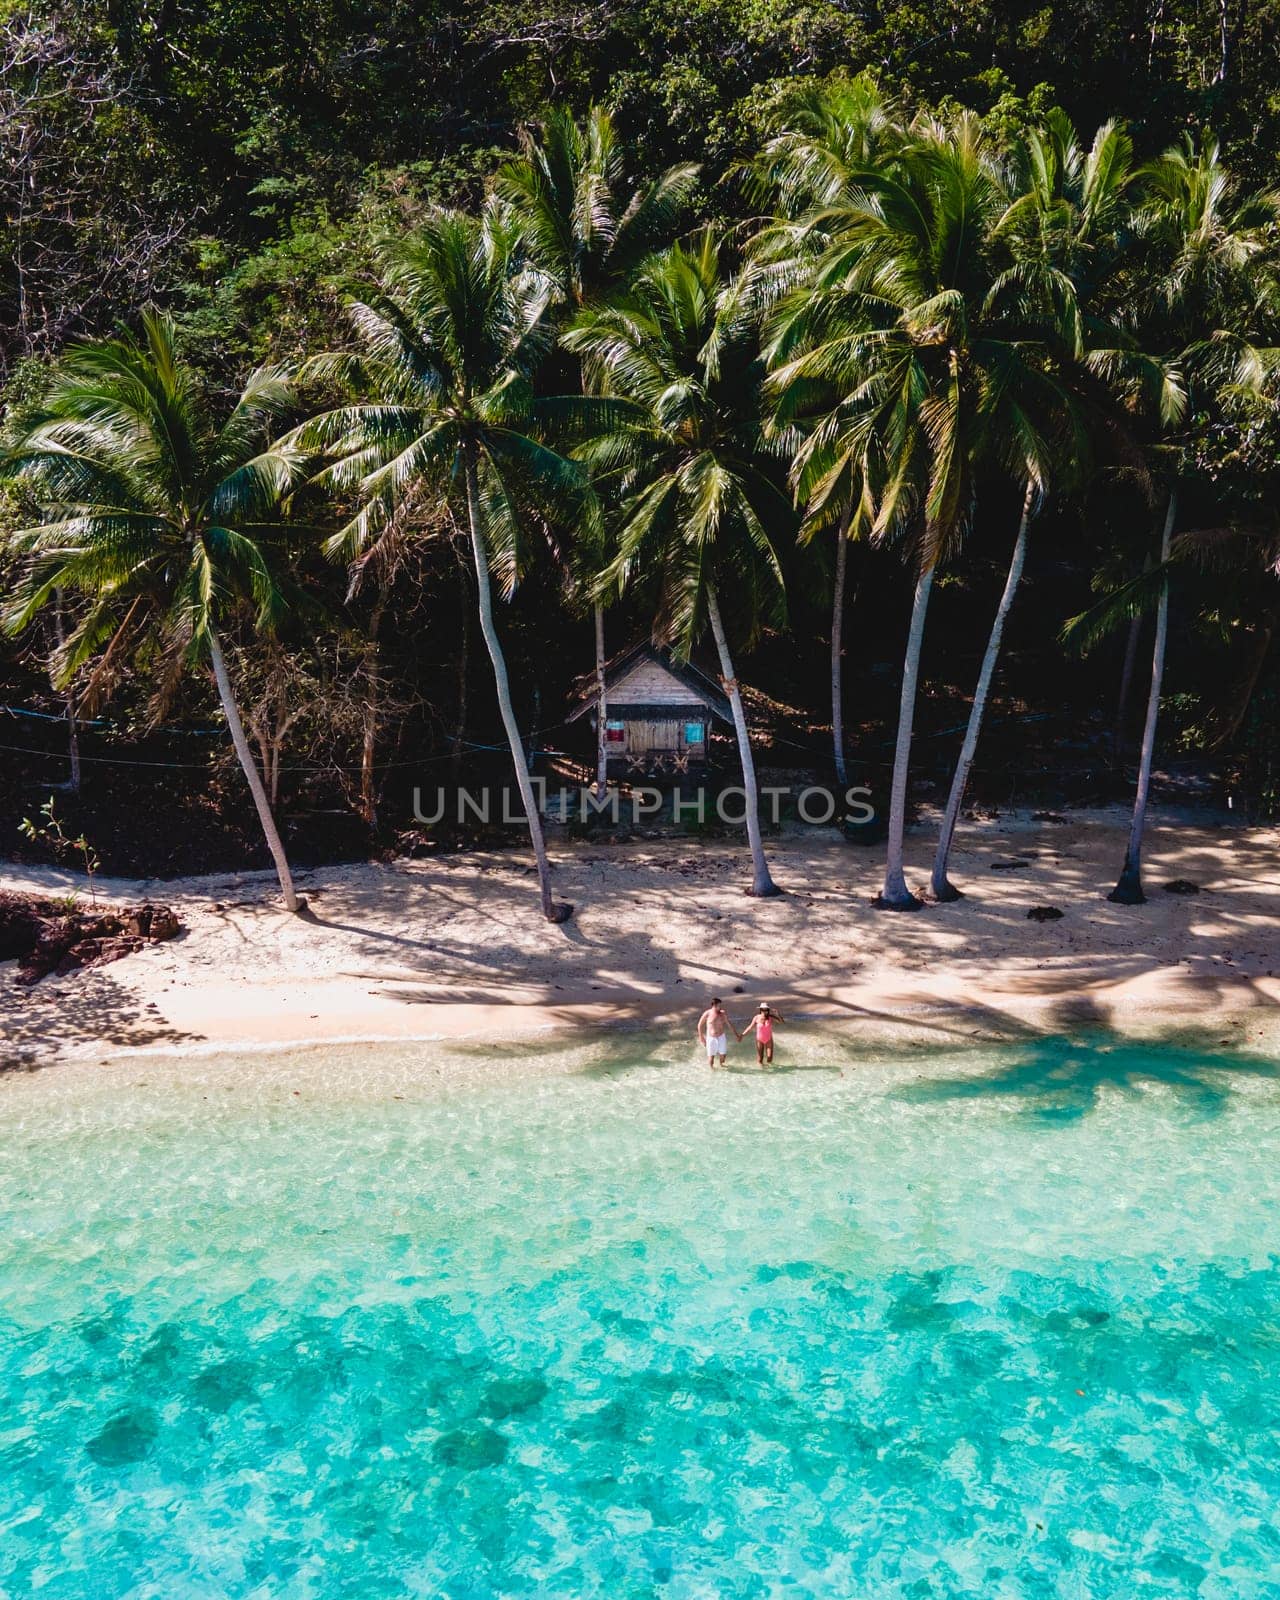 wooden bamboo hut bungalow on the beach with a turqouse colored ocean. a young couple of men and woman on a tropical Island in Thailand on vacation, Koh Wai Island Trat Thailand